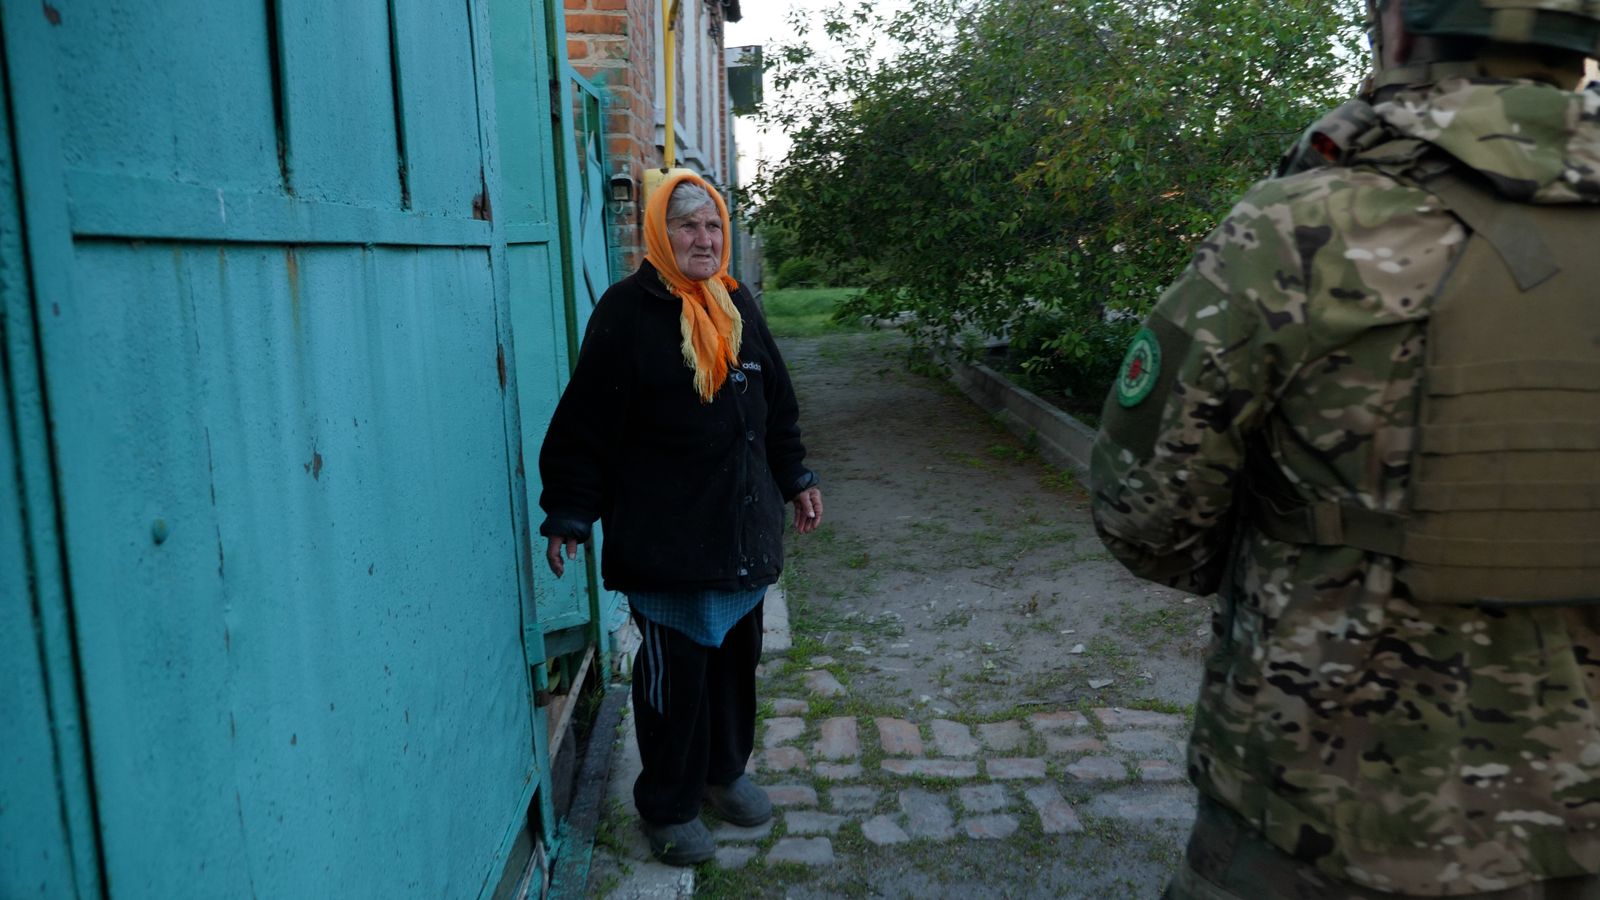 Terror, grief and rising smoke leave streets completely empty - as Ukrainians flee border town's fiercest attack yet